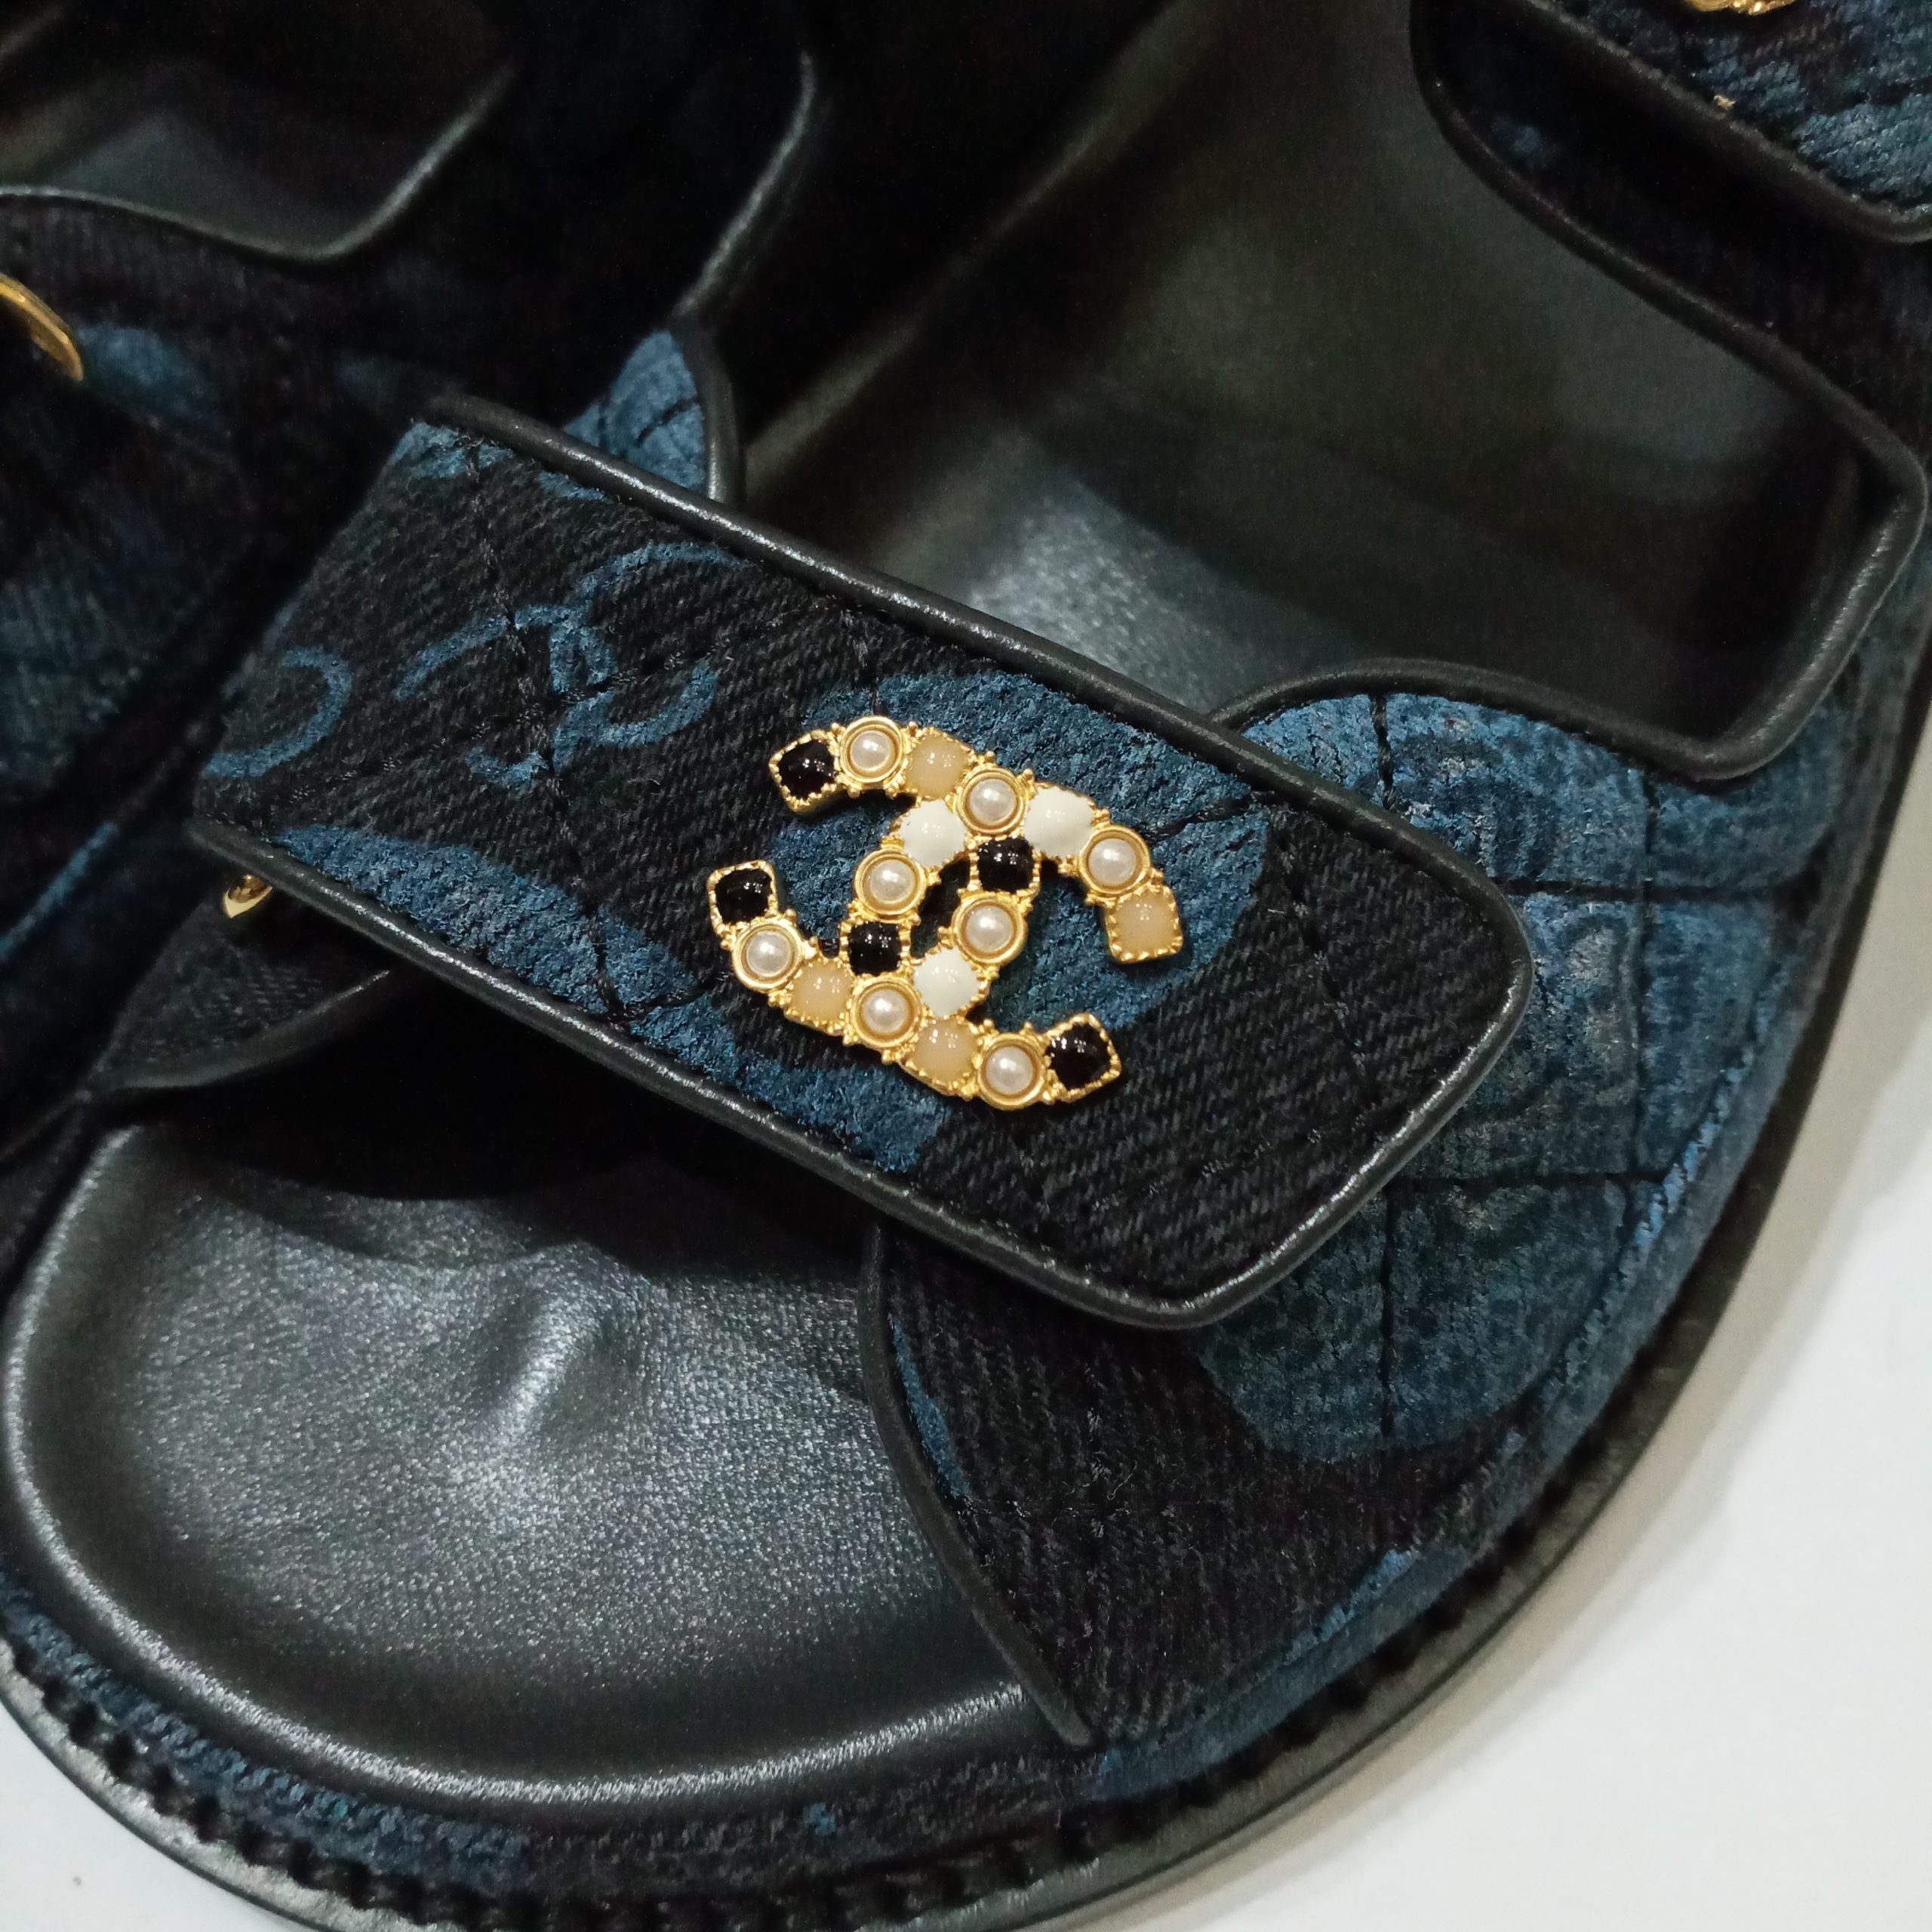 Chanel Denim Dad Sandals Size 38.5 – Coco Approved Studio